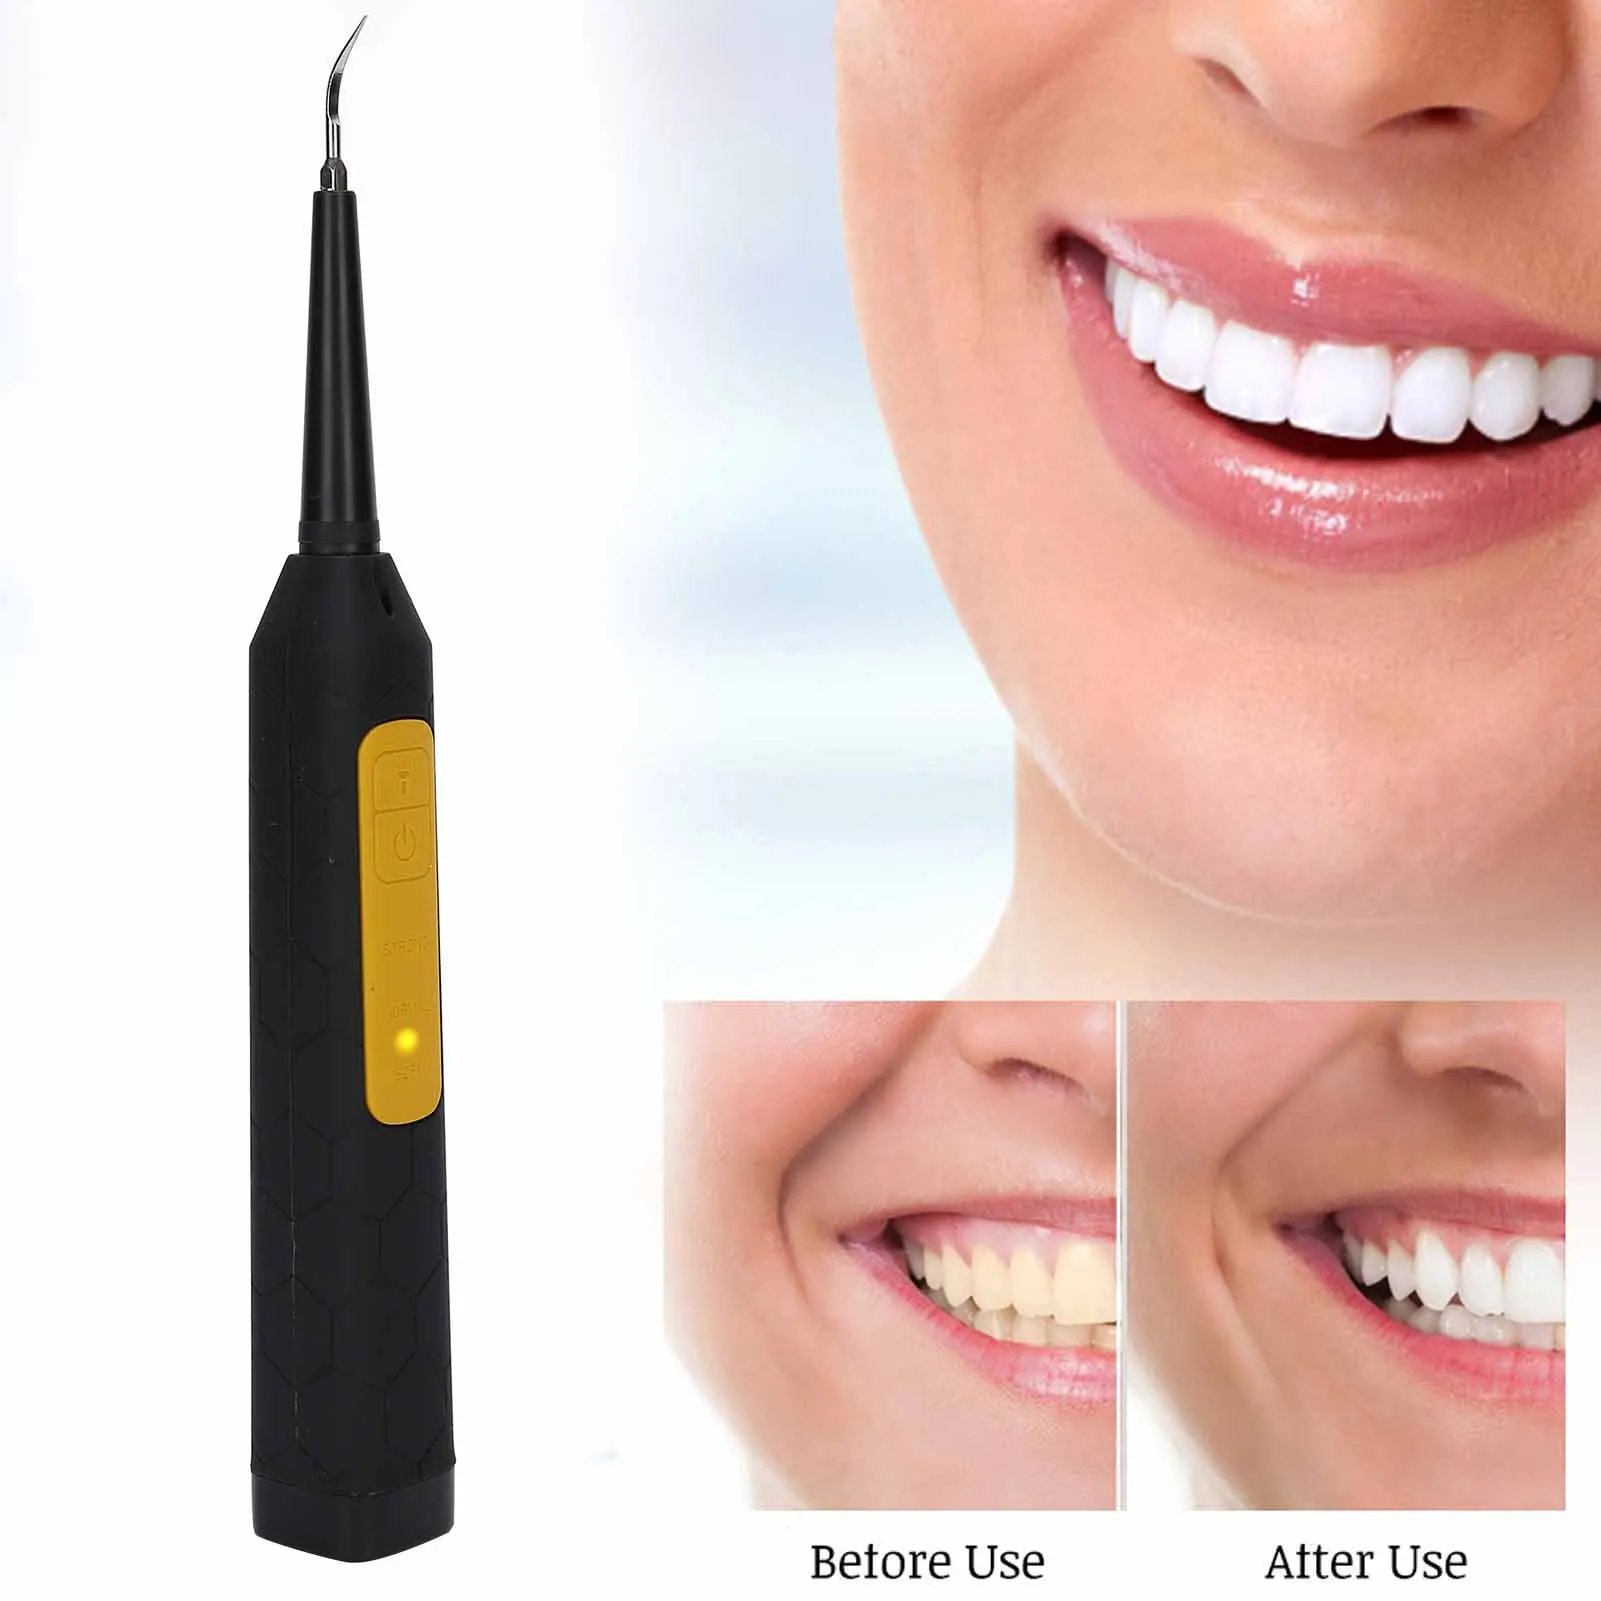 HighQuality Stainless Steel Head Tooth Cleaner Electric Calculus Remover Portable Teeth Tartar Remover Oral Care Tool USB Charg 1 2 4pcs 3 points 06b industrial sprocket 9 to 50 teeth craft hole 45 steel tooth surface quenching pitch 9 525mm transmission